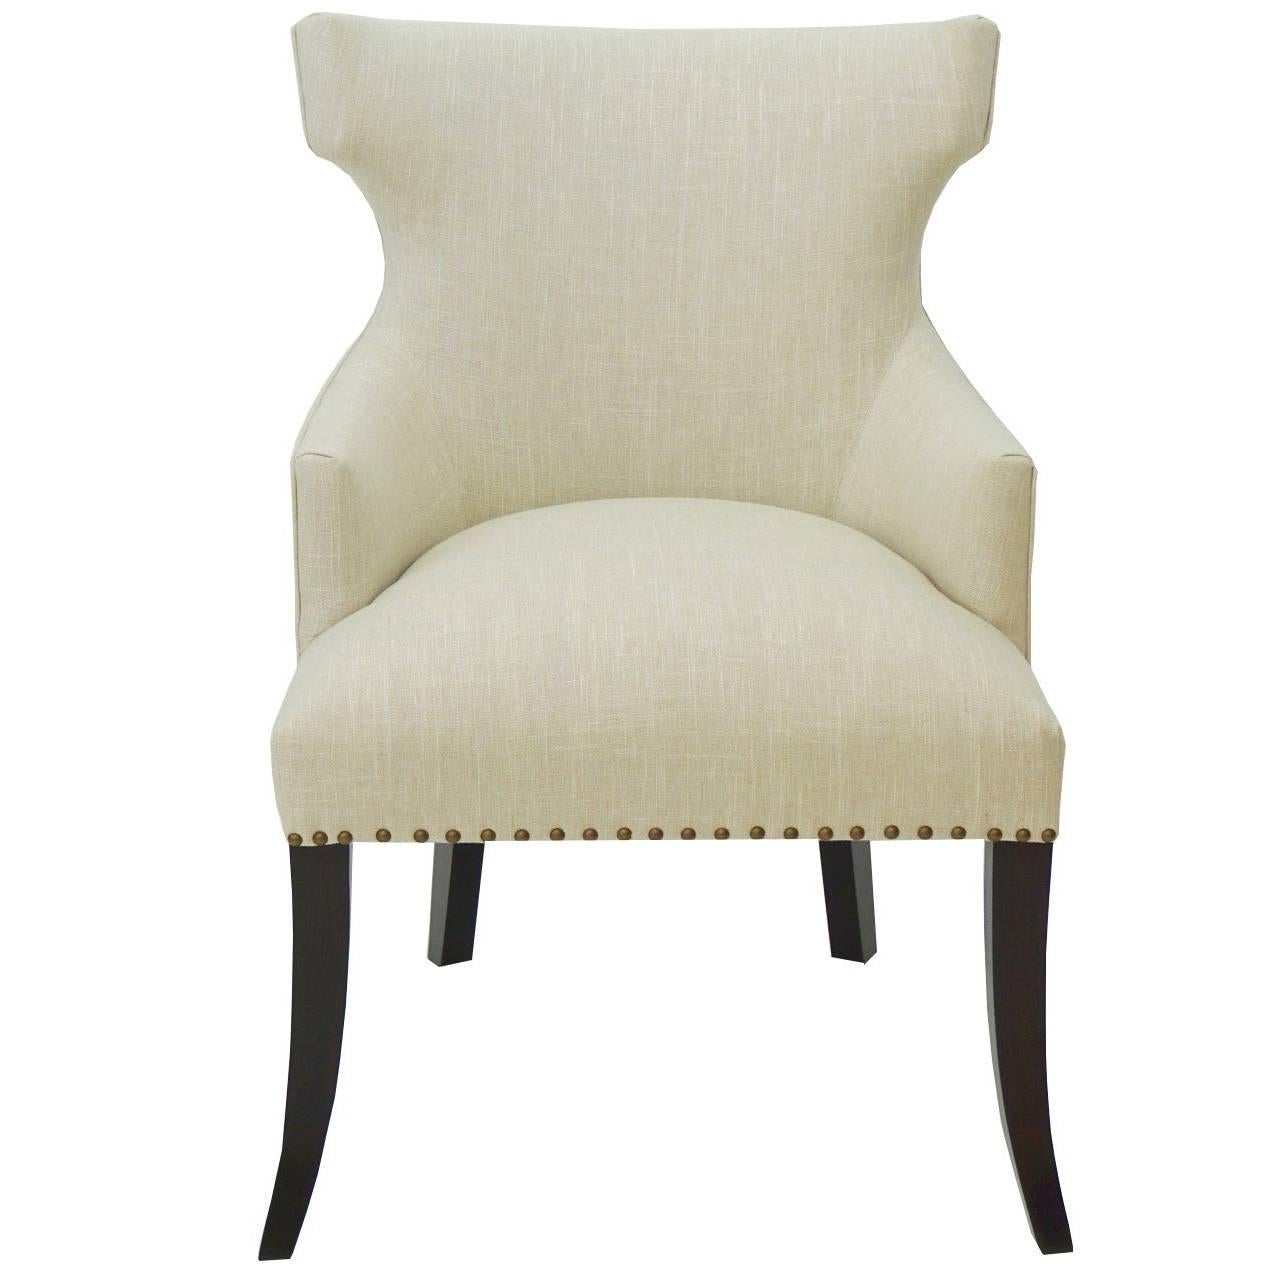 Custom Dining Room Chair with Hourglass Back